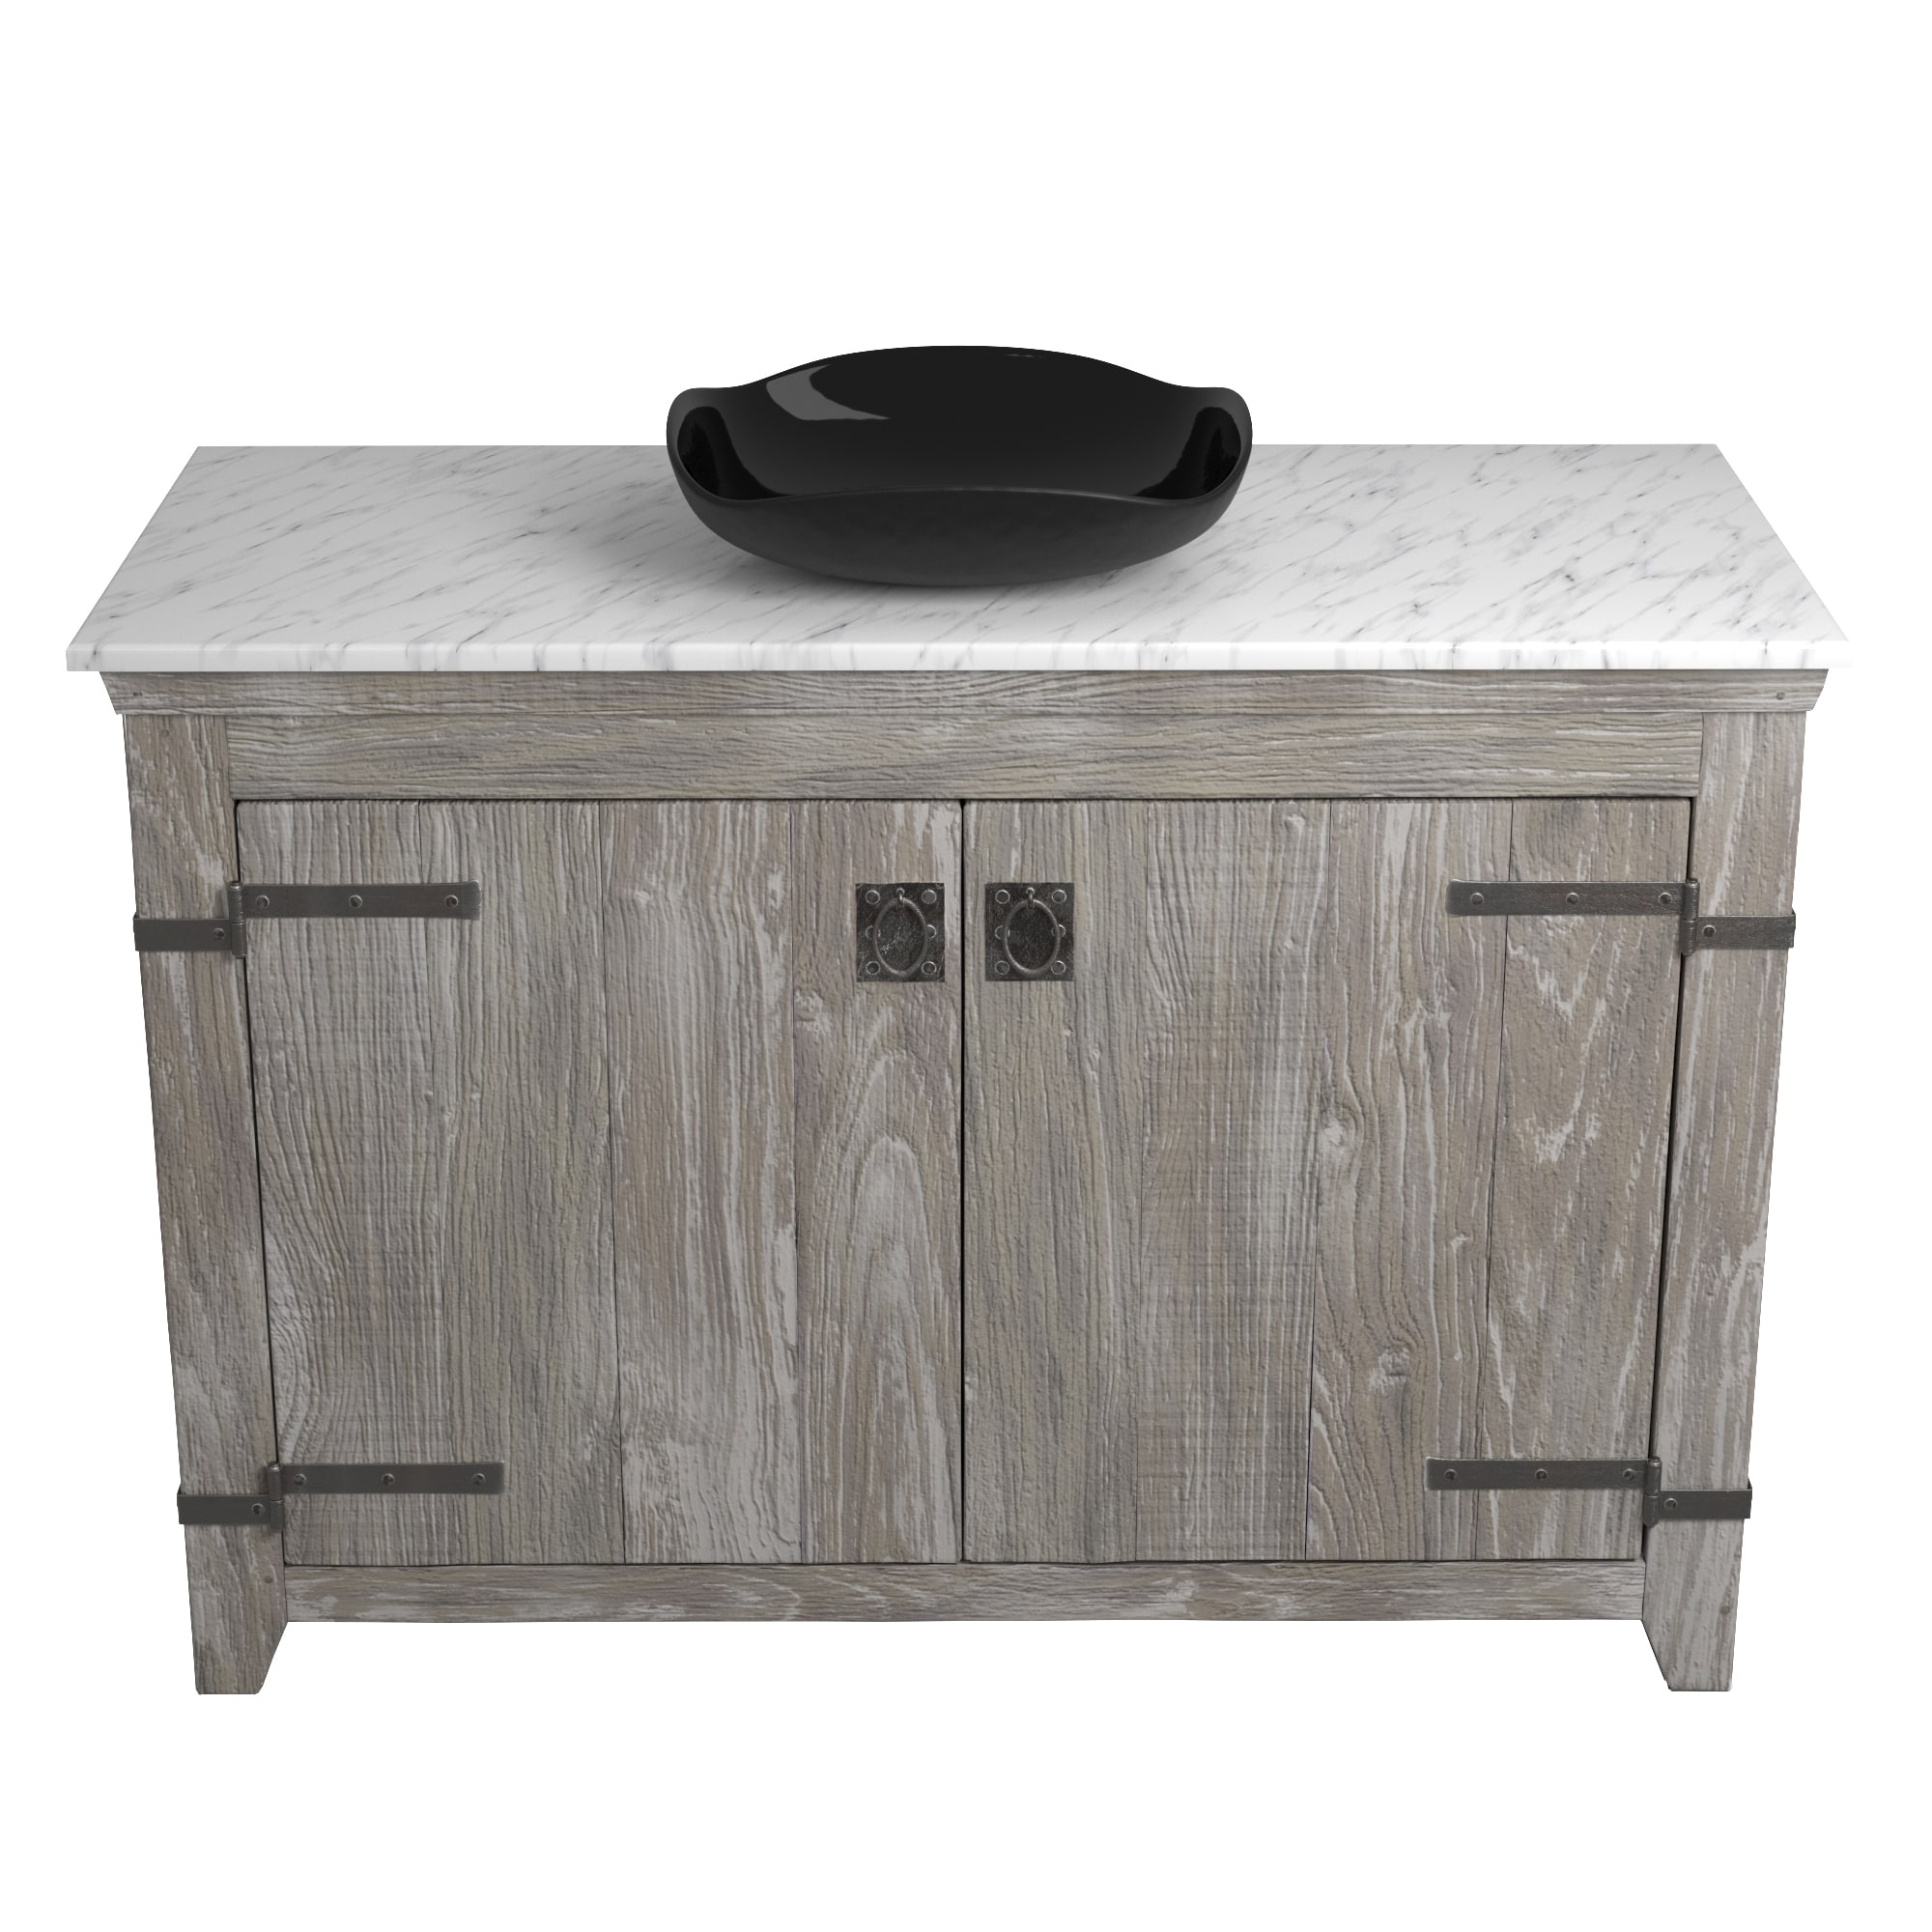 Native Trails 48" Americana Vanity in Driftwood with Carrara Marble Top and Lido in Abyss, No Faucet Hole, BND48-VB-CT-MG-016